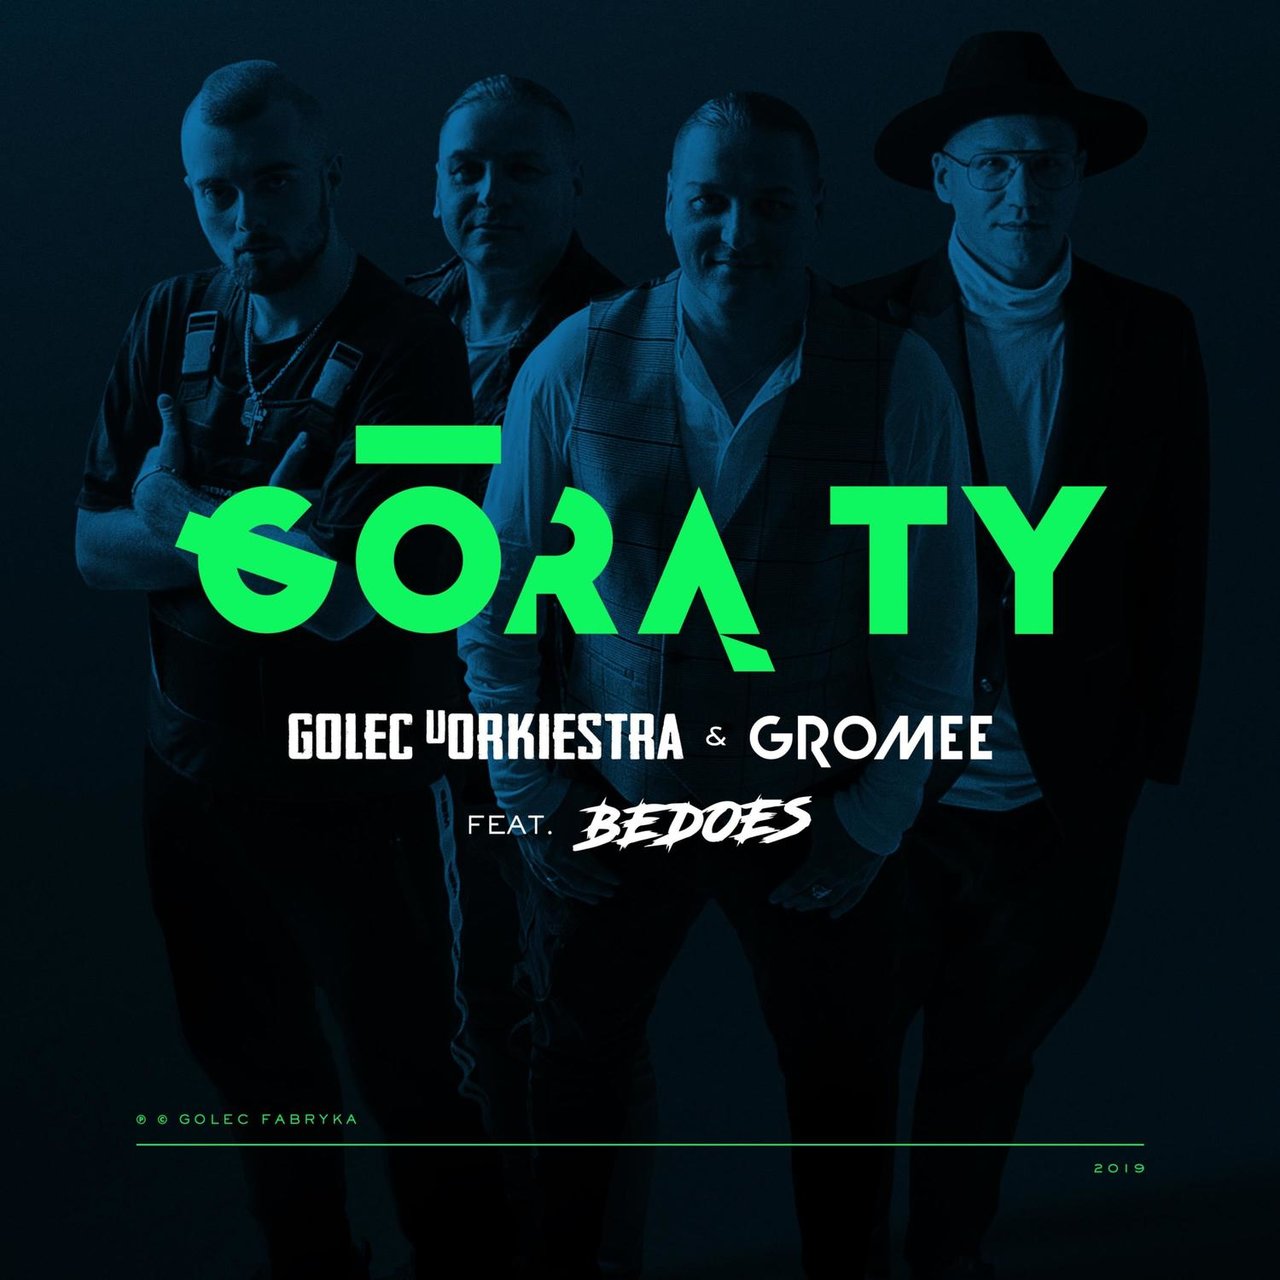 Golec uOrkiestra & Gromee featuring Bedoes — Górą Ty cover artwork